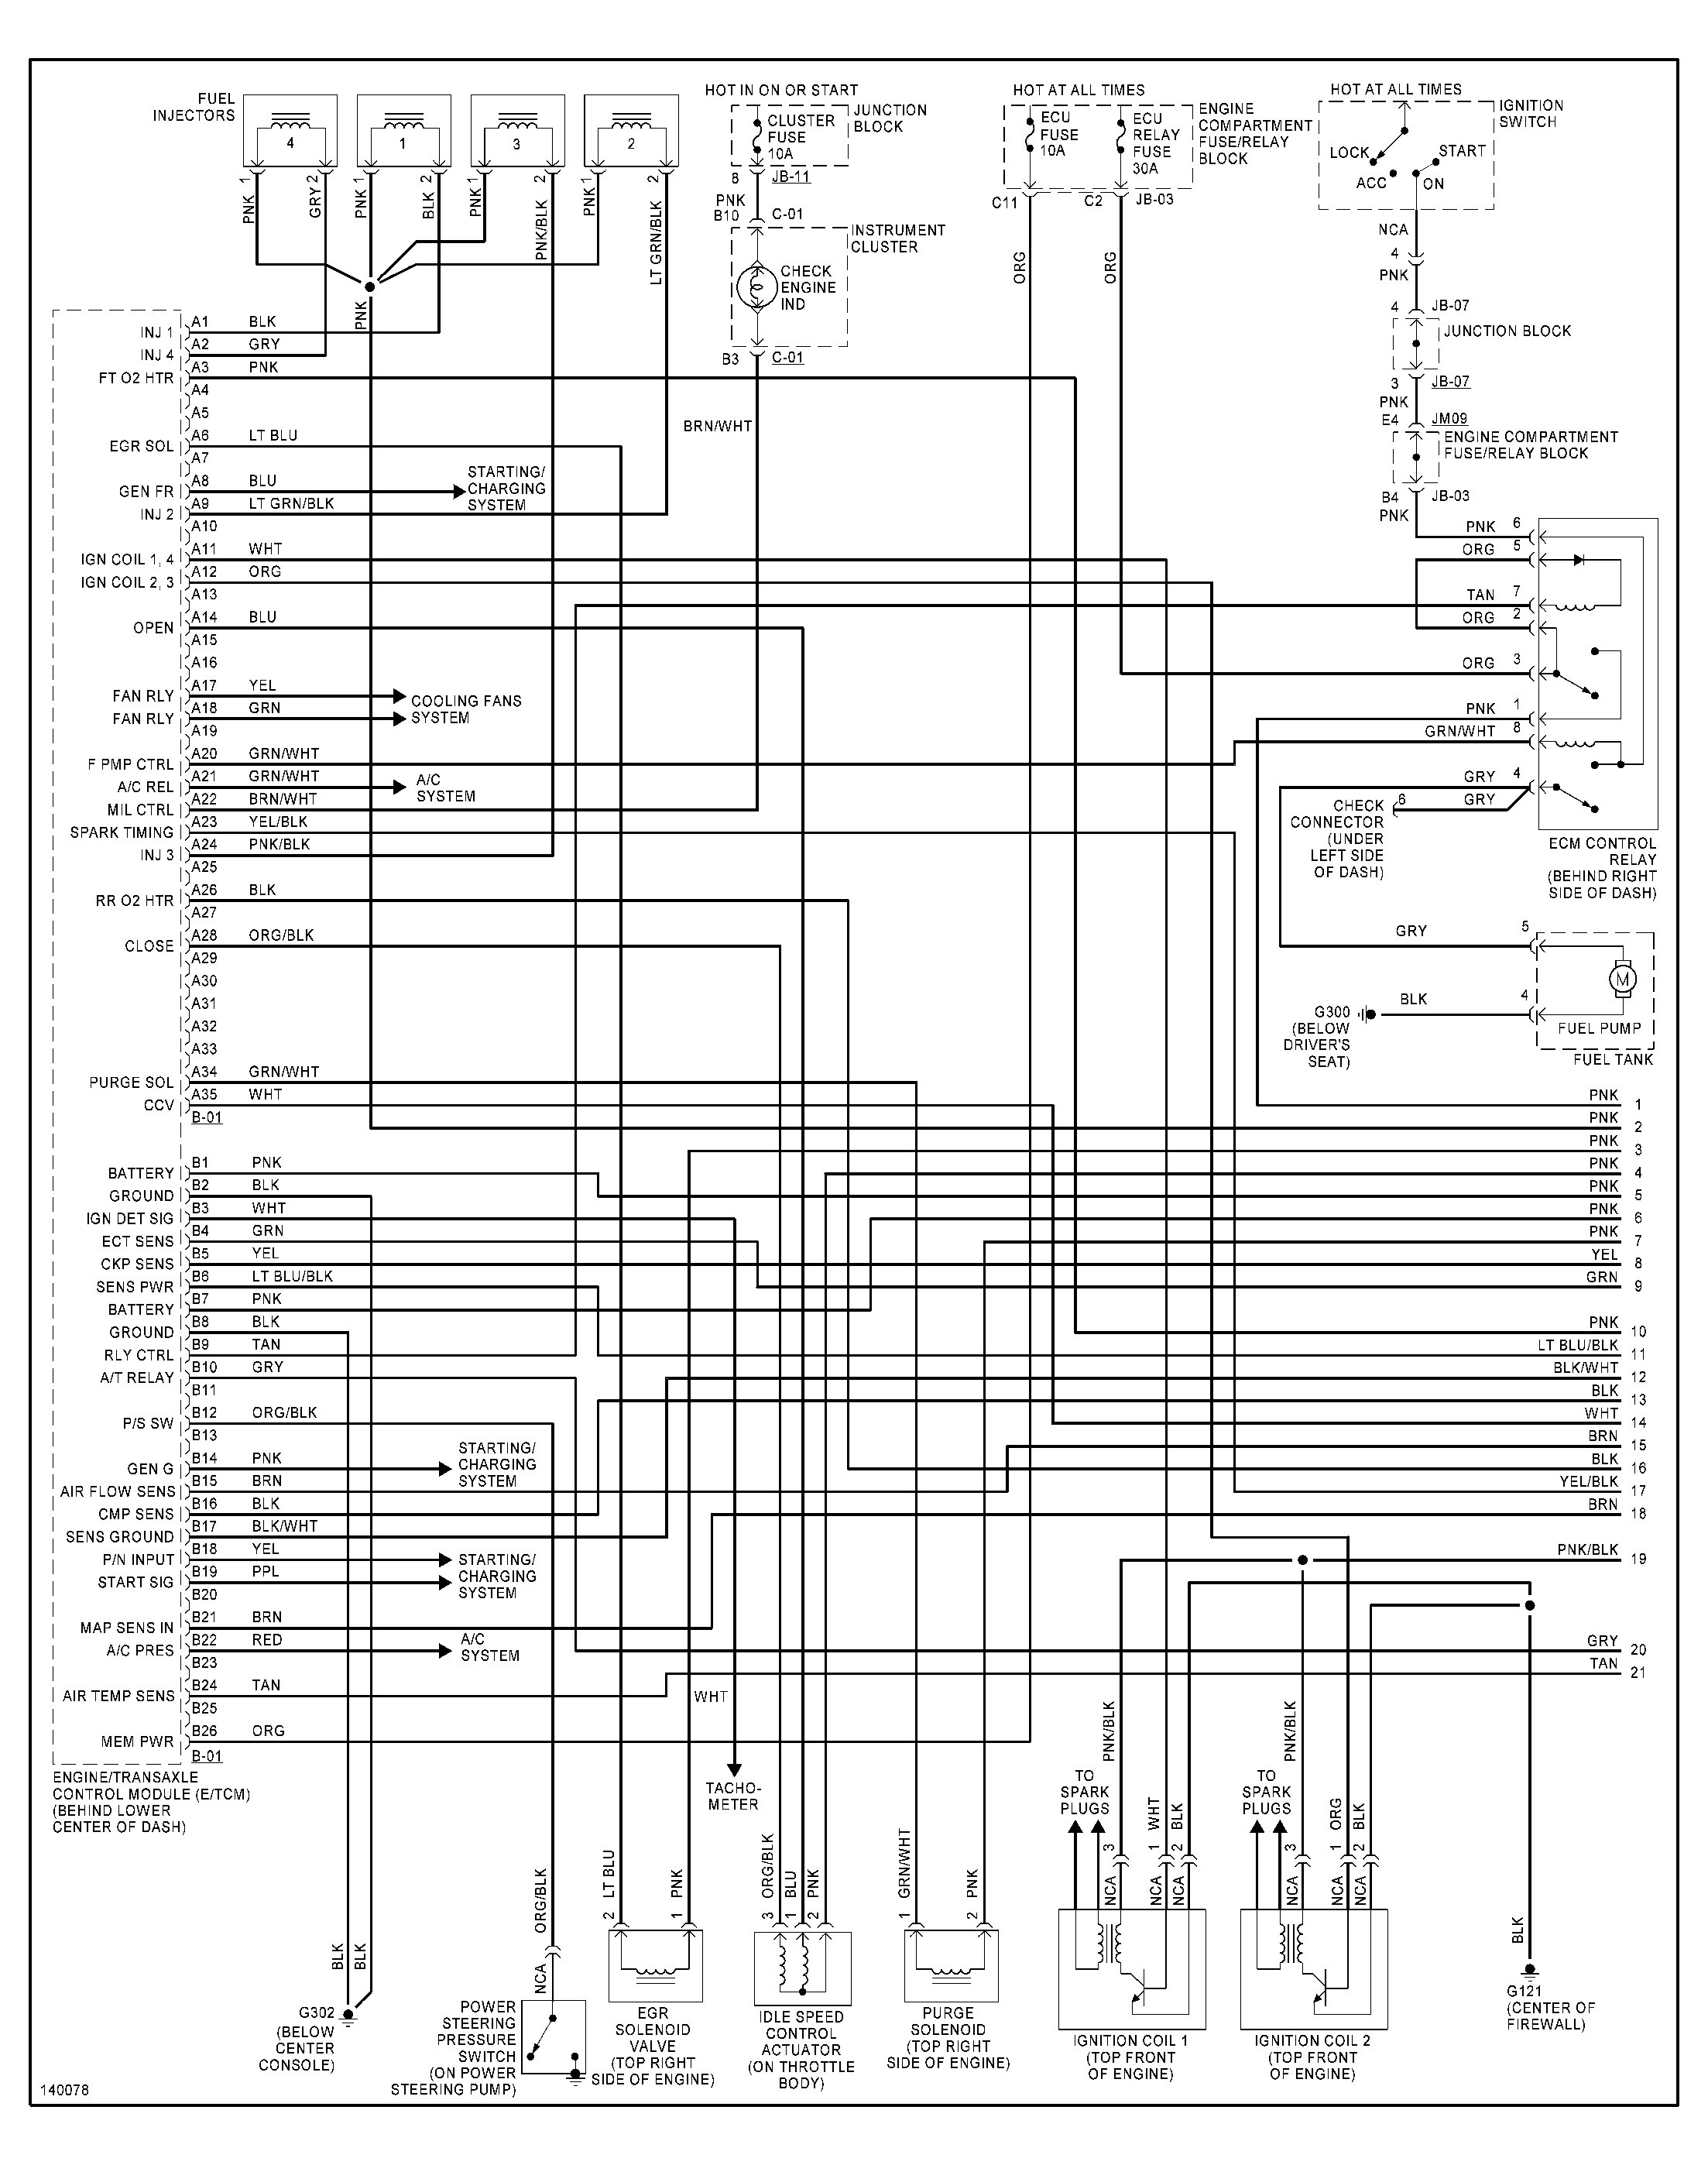 Wiring Diagram for An Electric Fuel Pump and Relay Awesome Fuel Pump Wiring Harness Diagram Diagram Of Wiring Diagram for An Electric Fuel Pump and Relay